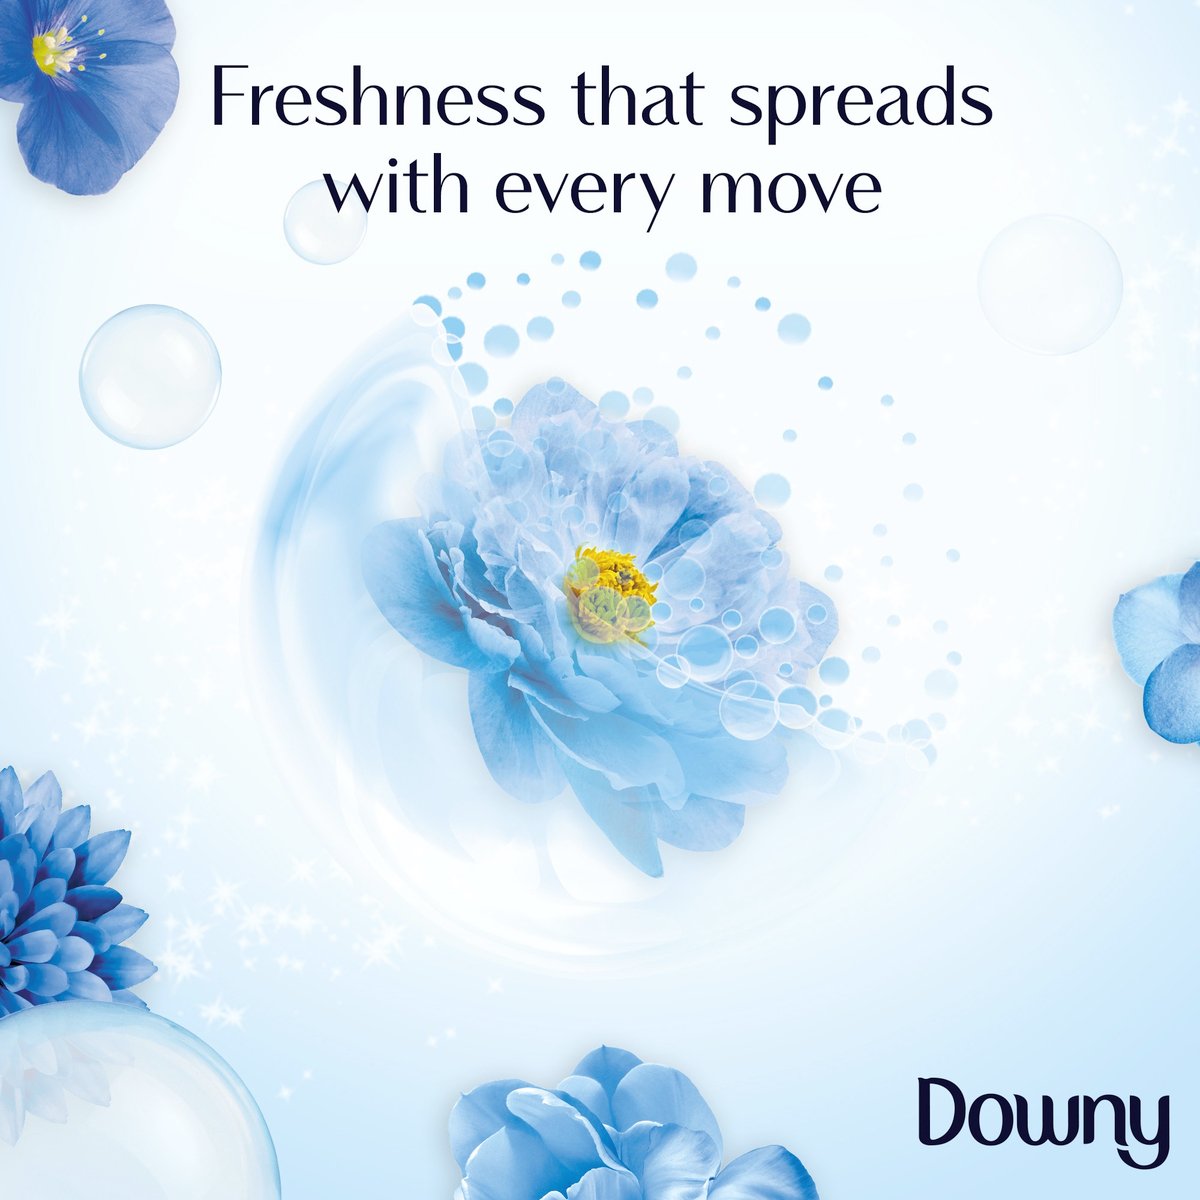 Downy Concentrate Fabric Softener Antibac 1Litre 